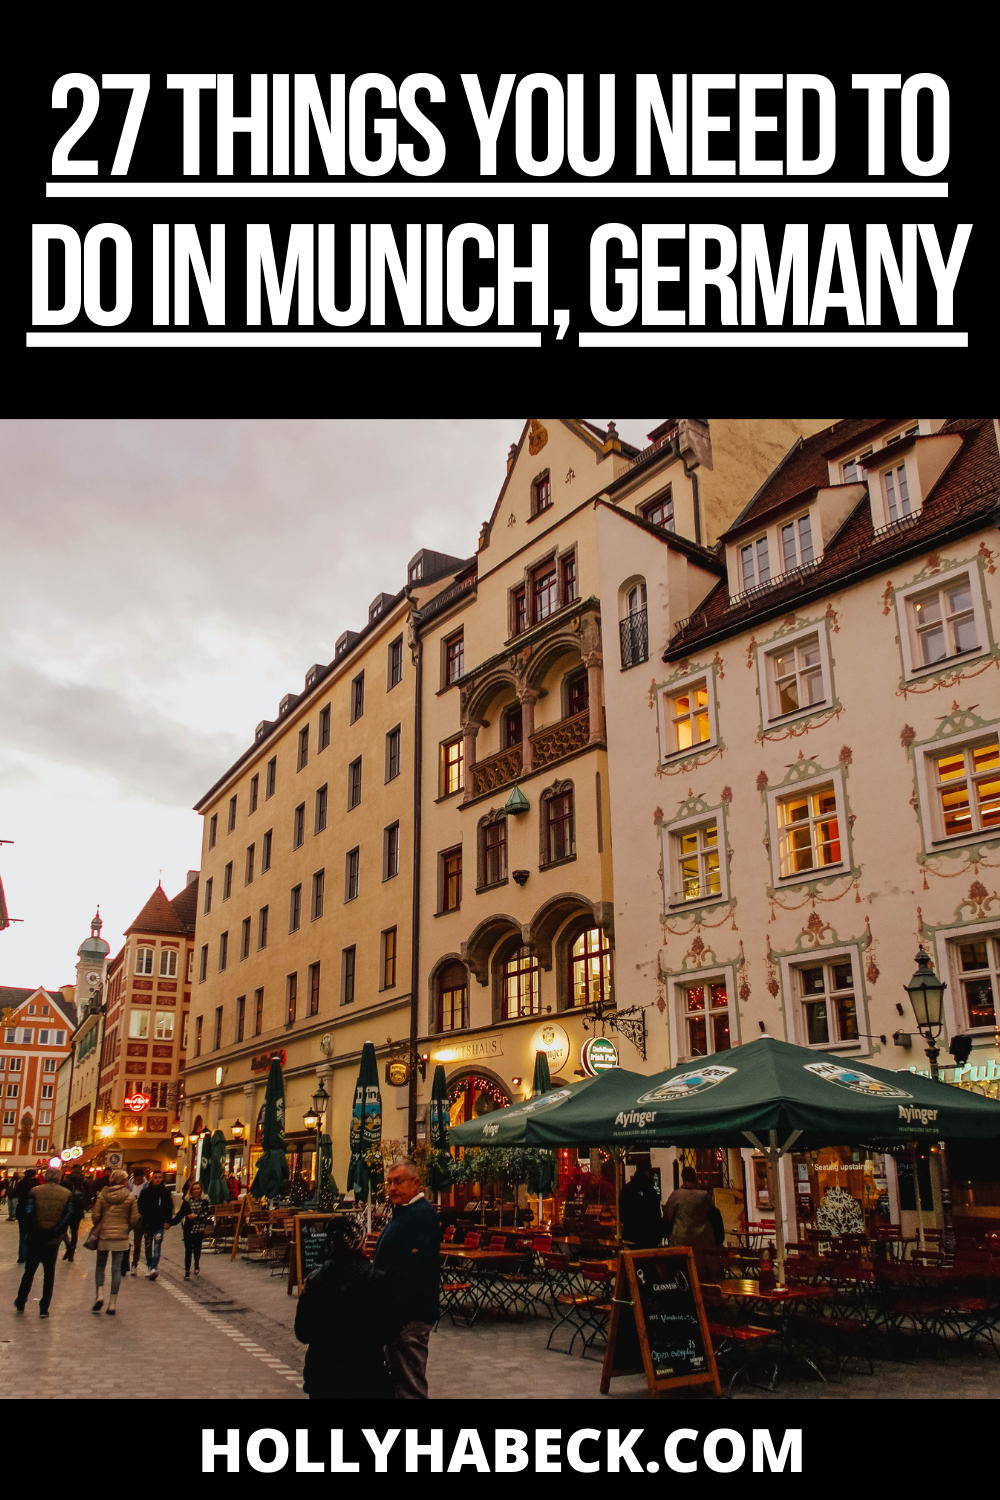 27 Things to Need to do in Munich Germany